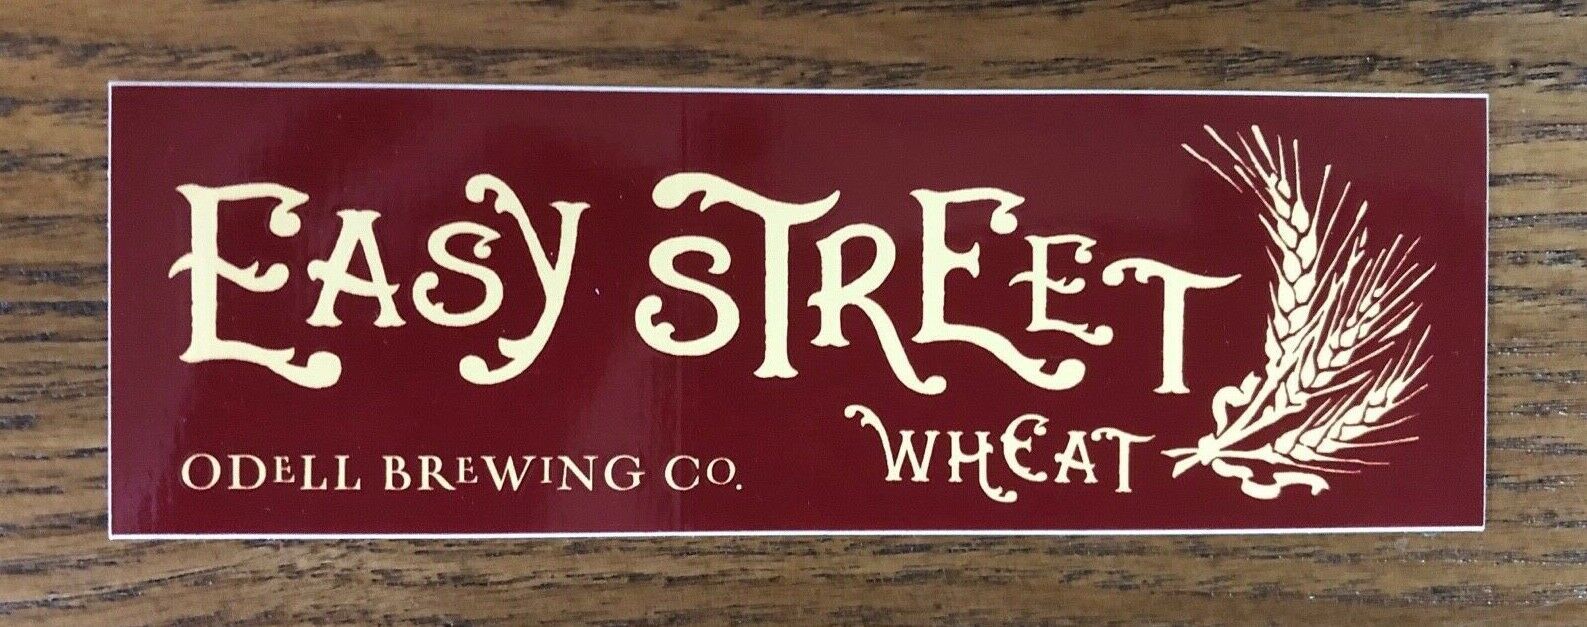 ODELL BREWING CO Colorado Logo STICKER decal craft beer brewery Ft Collins 